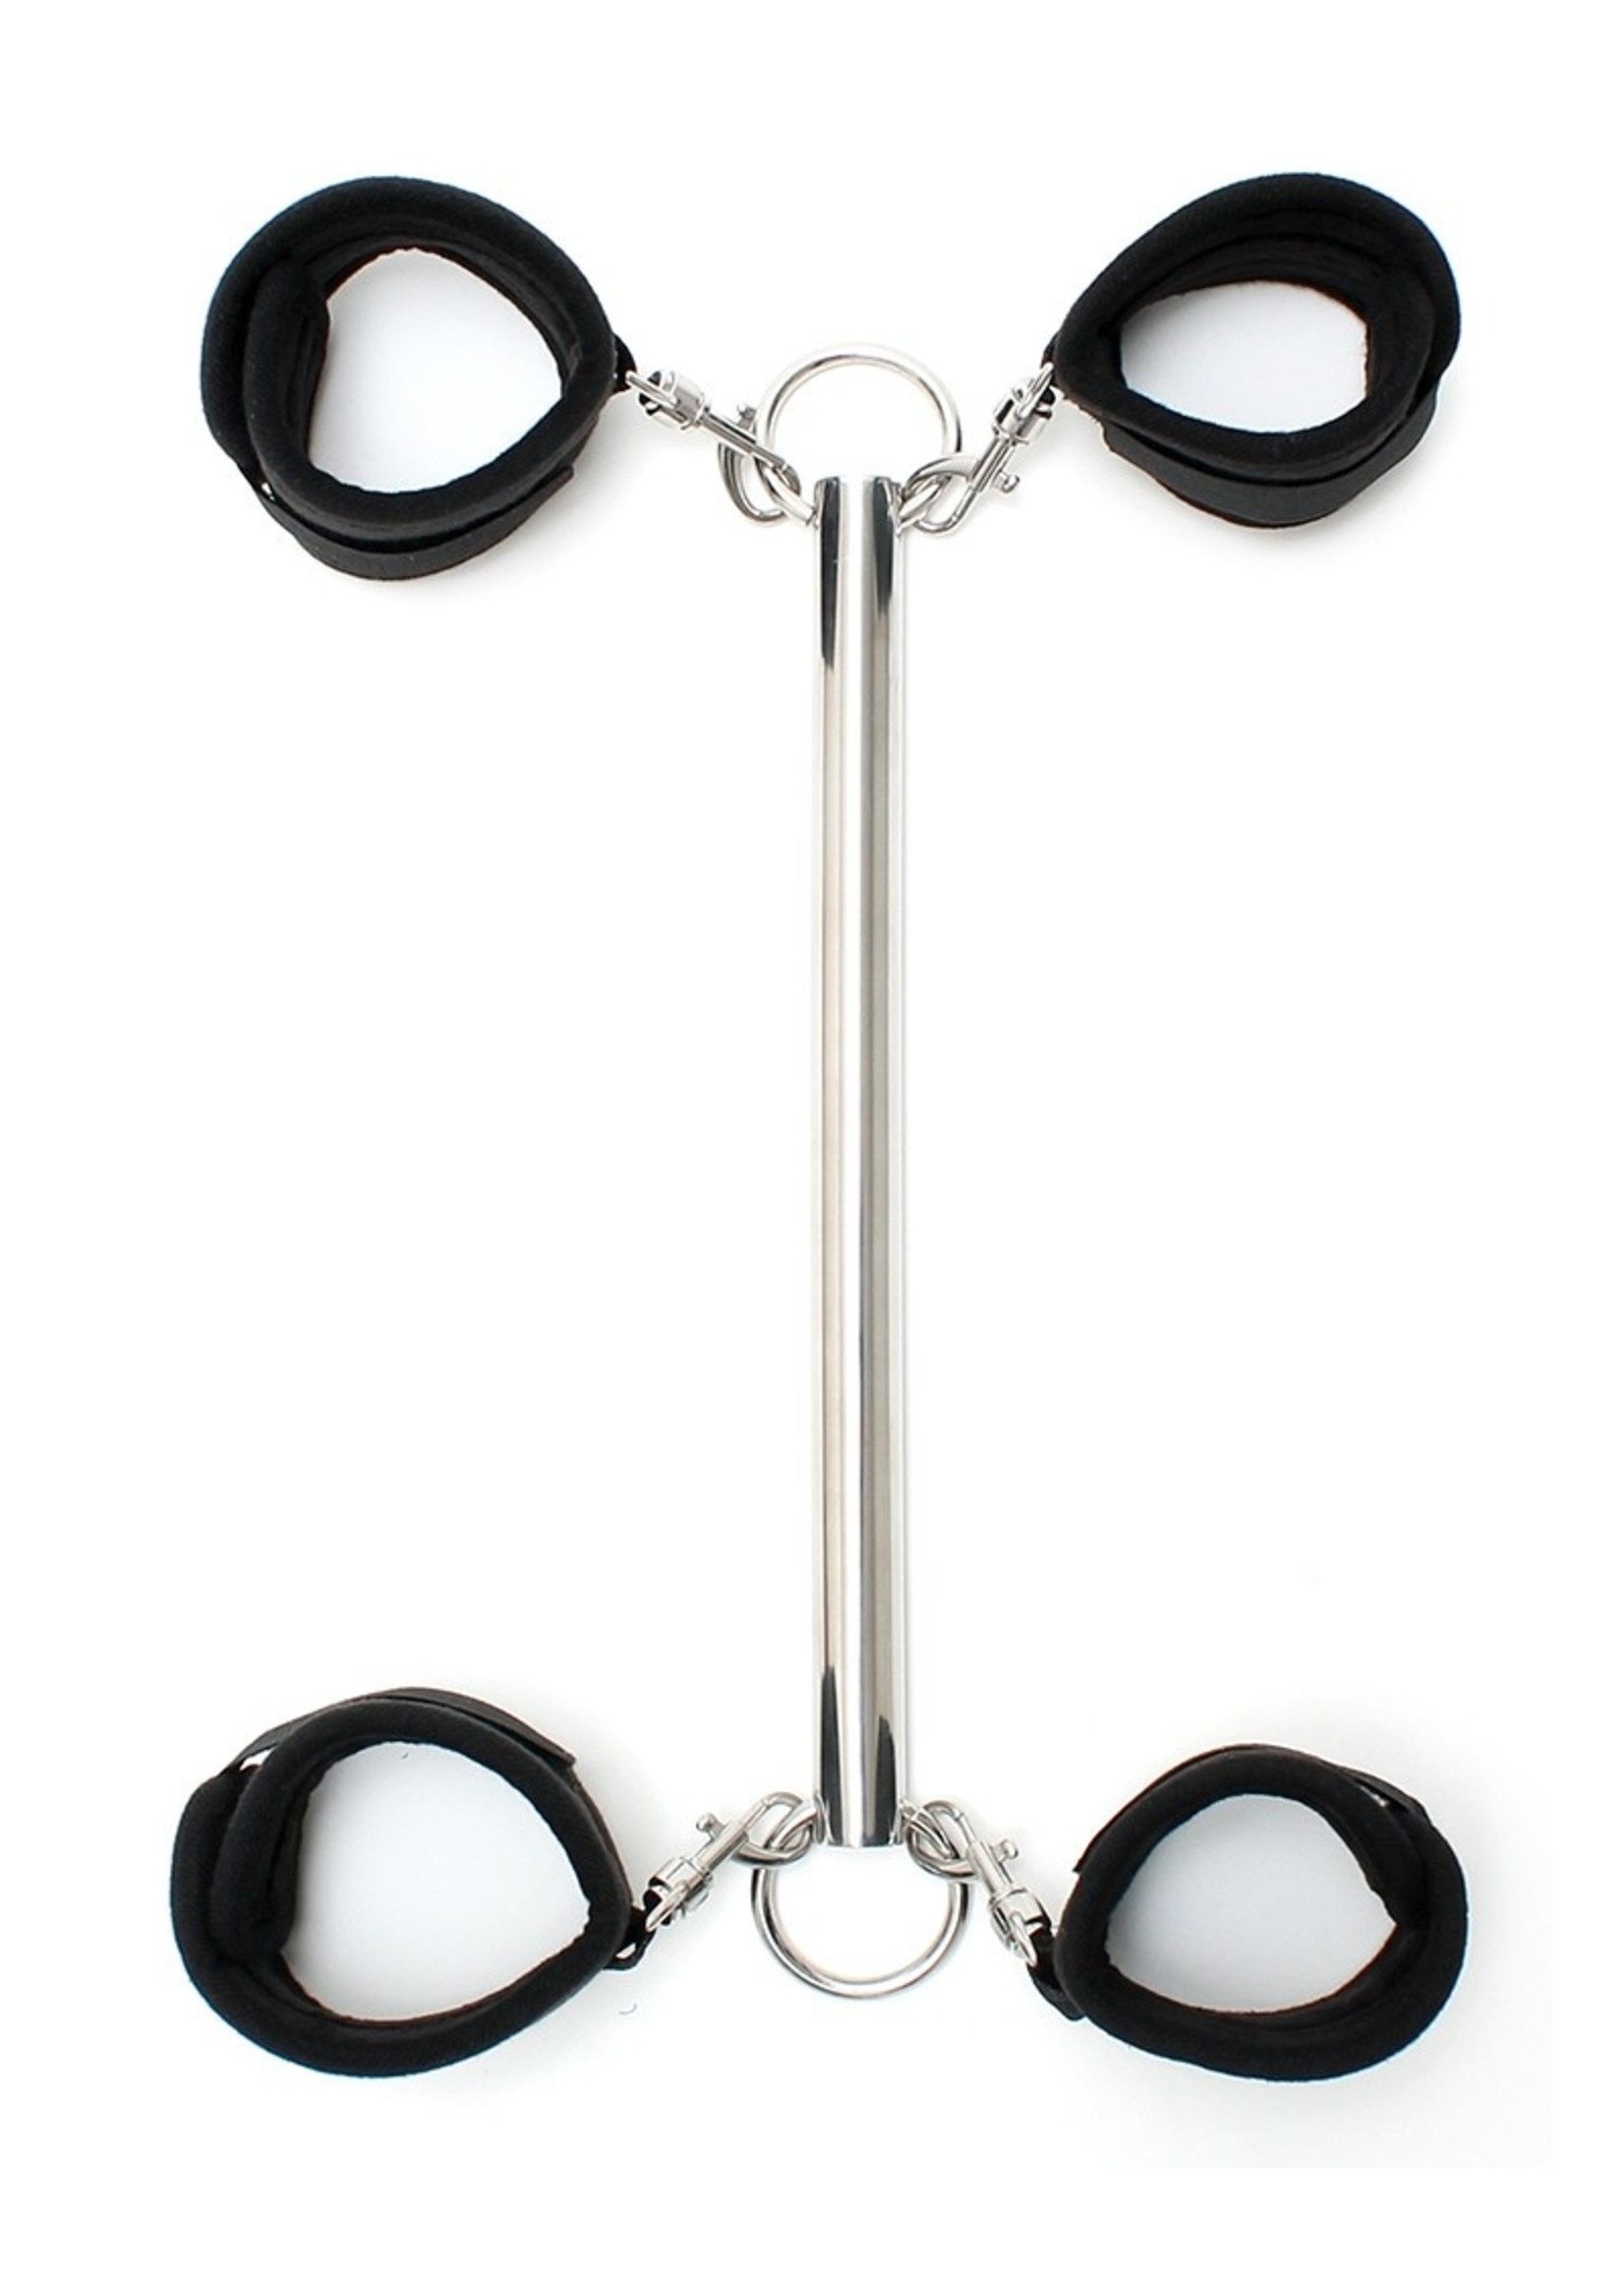 Rimba Spreader bar with  detachable for cuffs